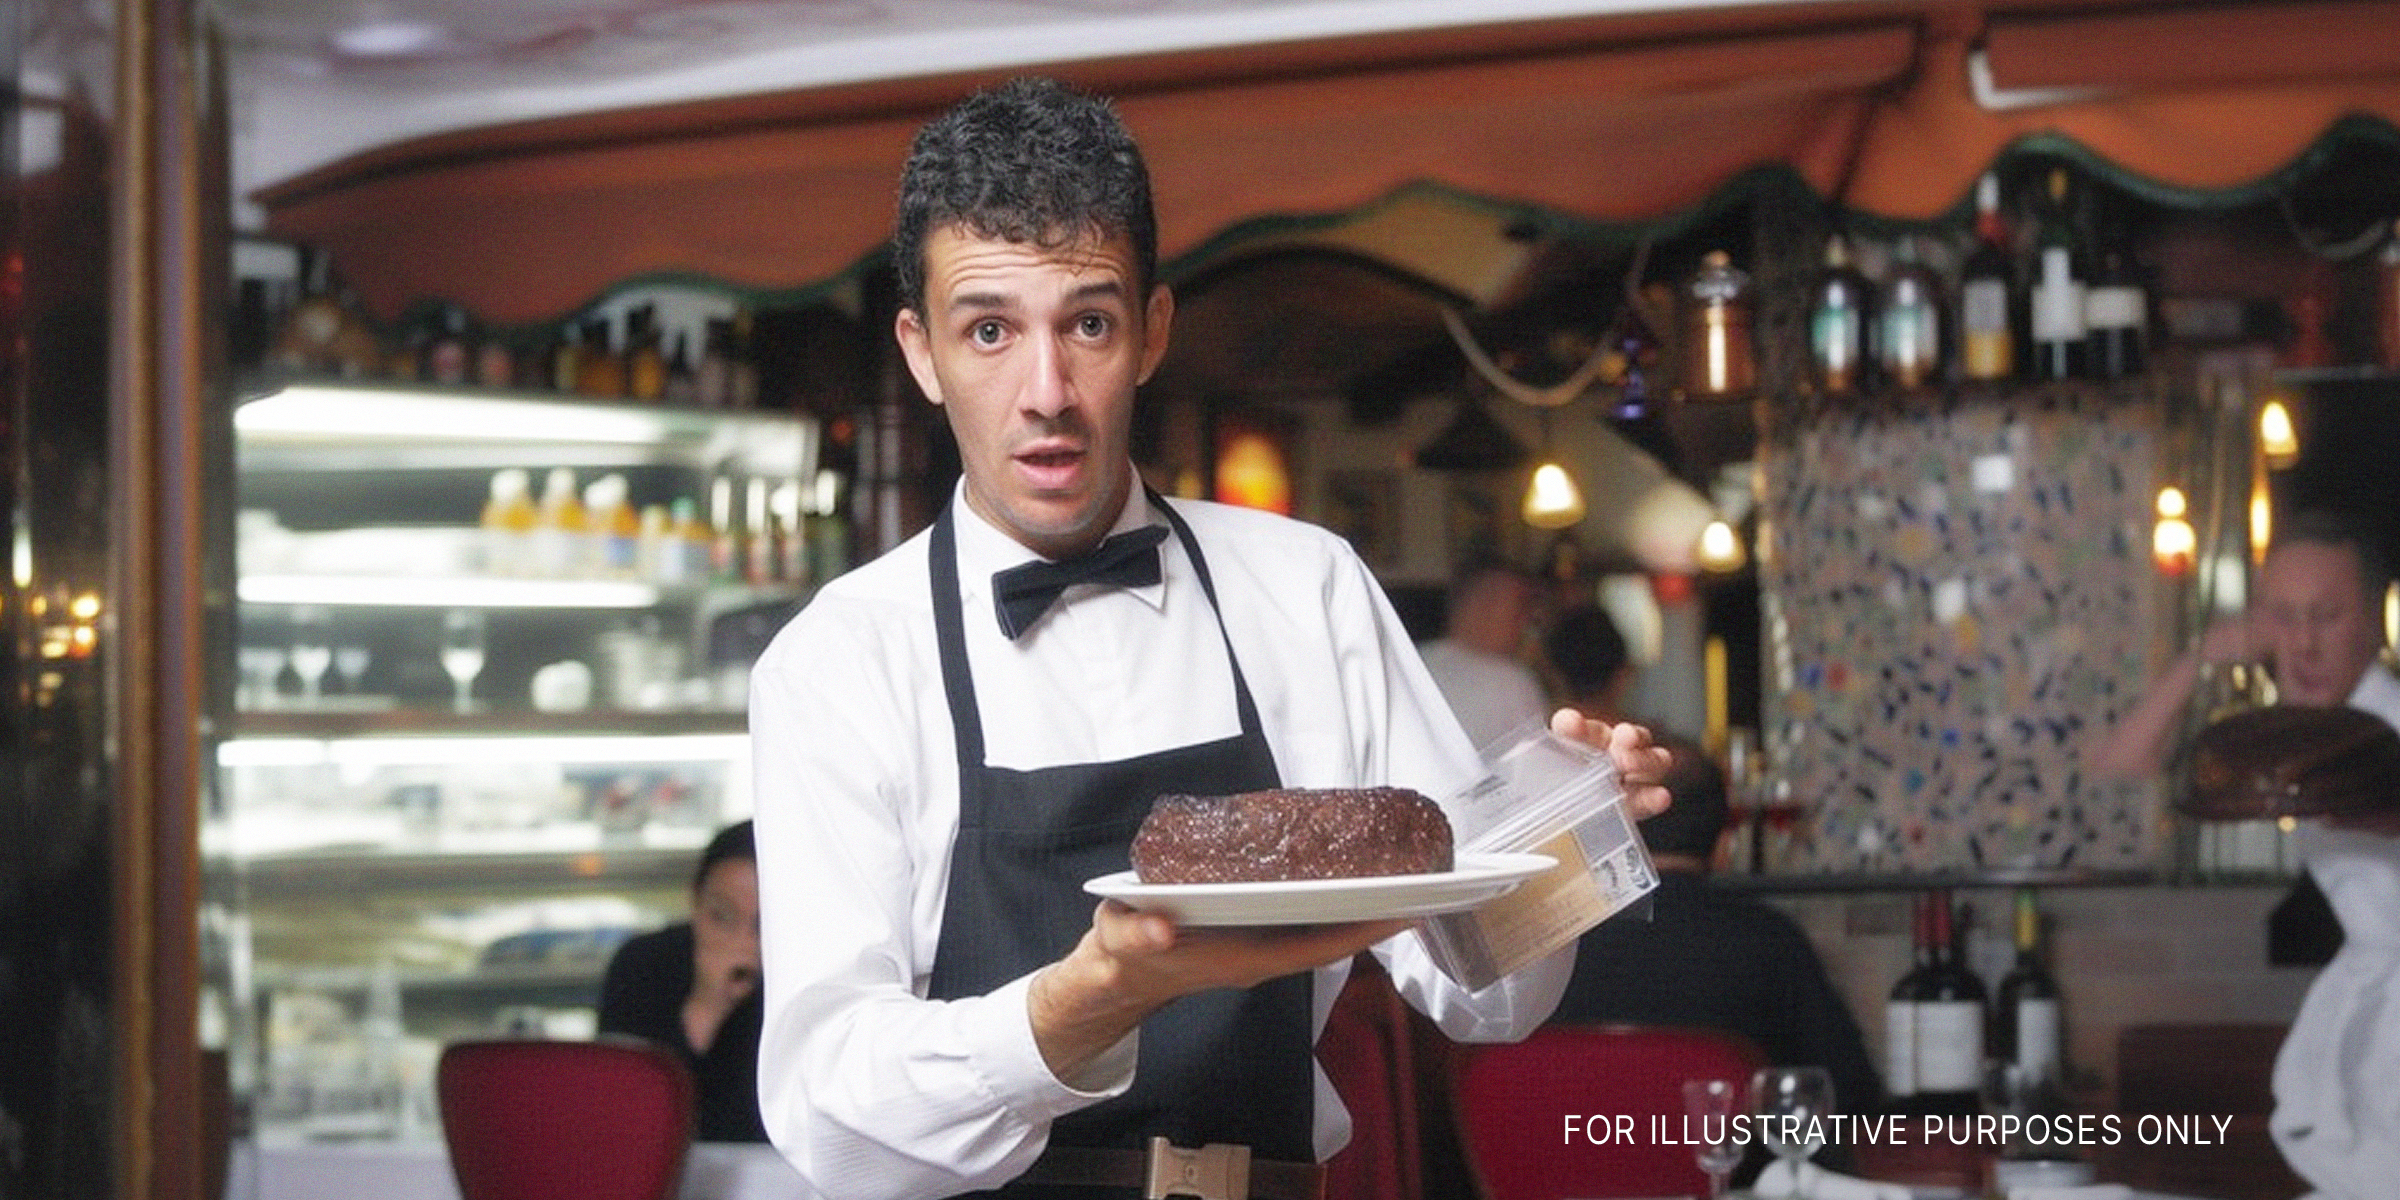 A waiter holding a plate of meatloaf | Source: Midjourney